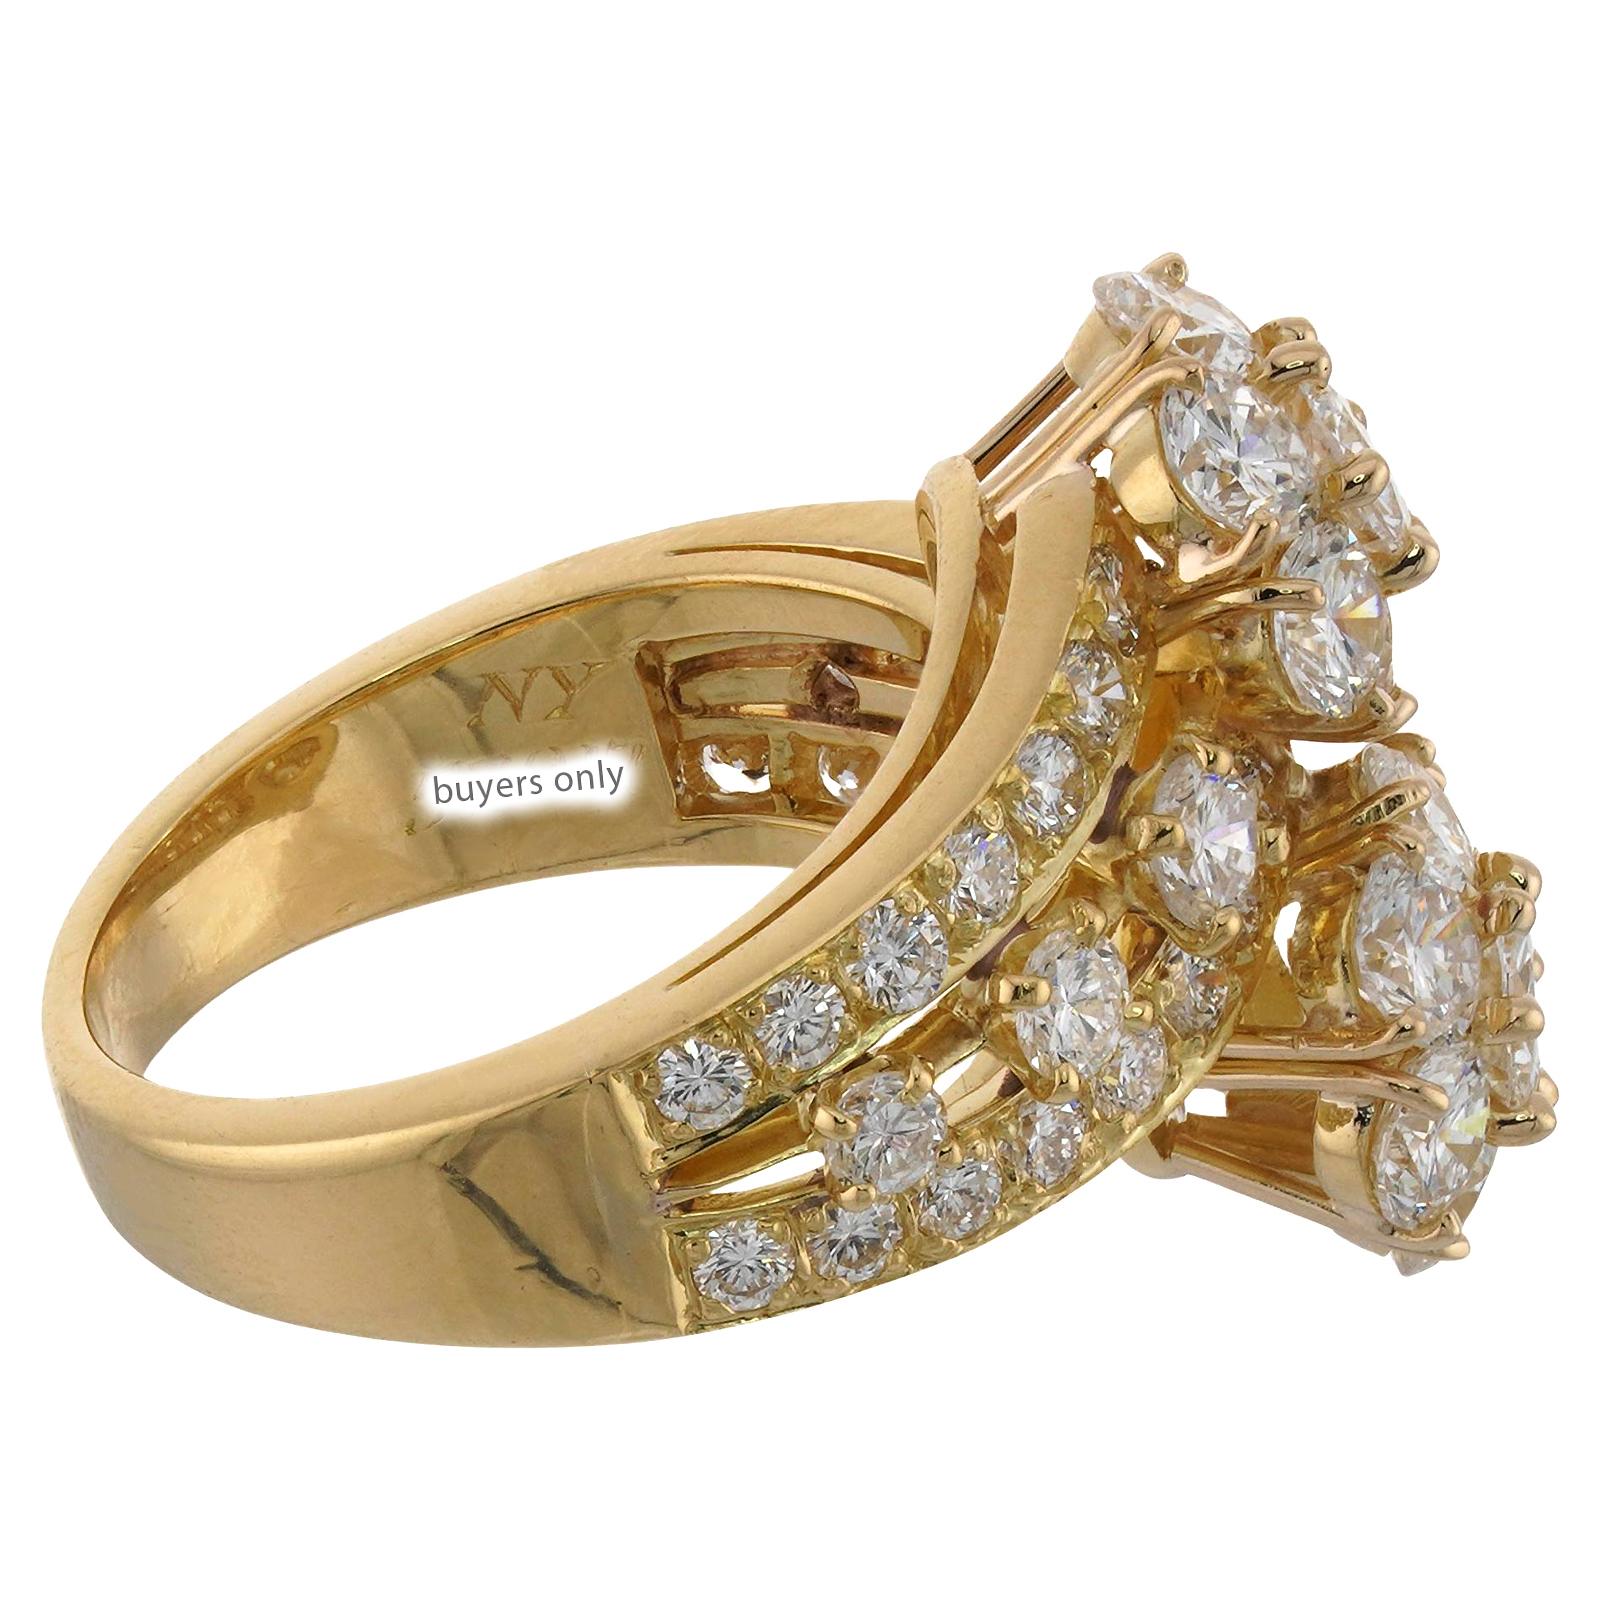 VAN CLEEF & ARPELS Snowflake 18k Yellow Gold Diamond Ring Size 5 For Sale 1